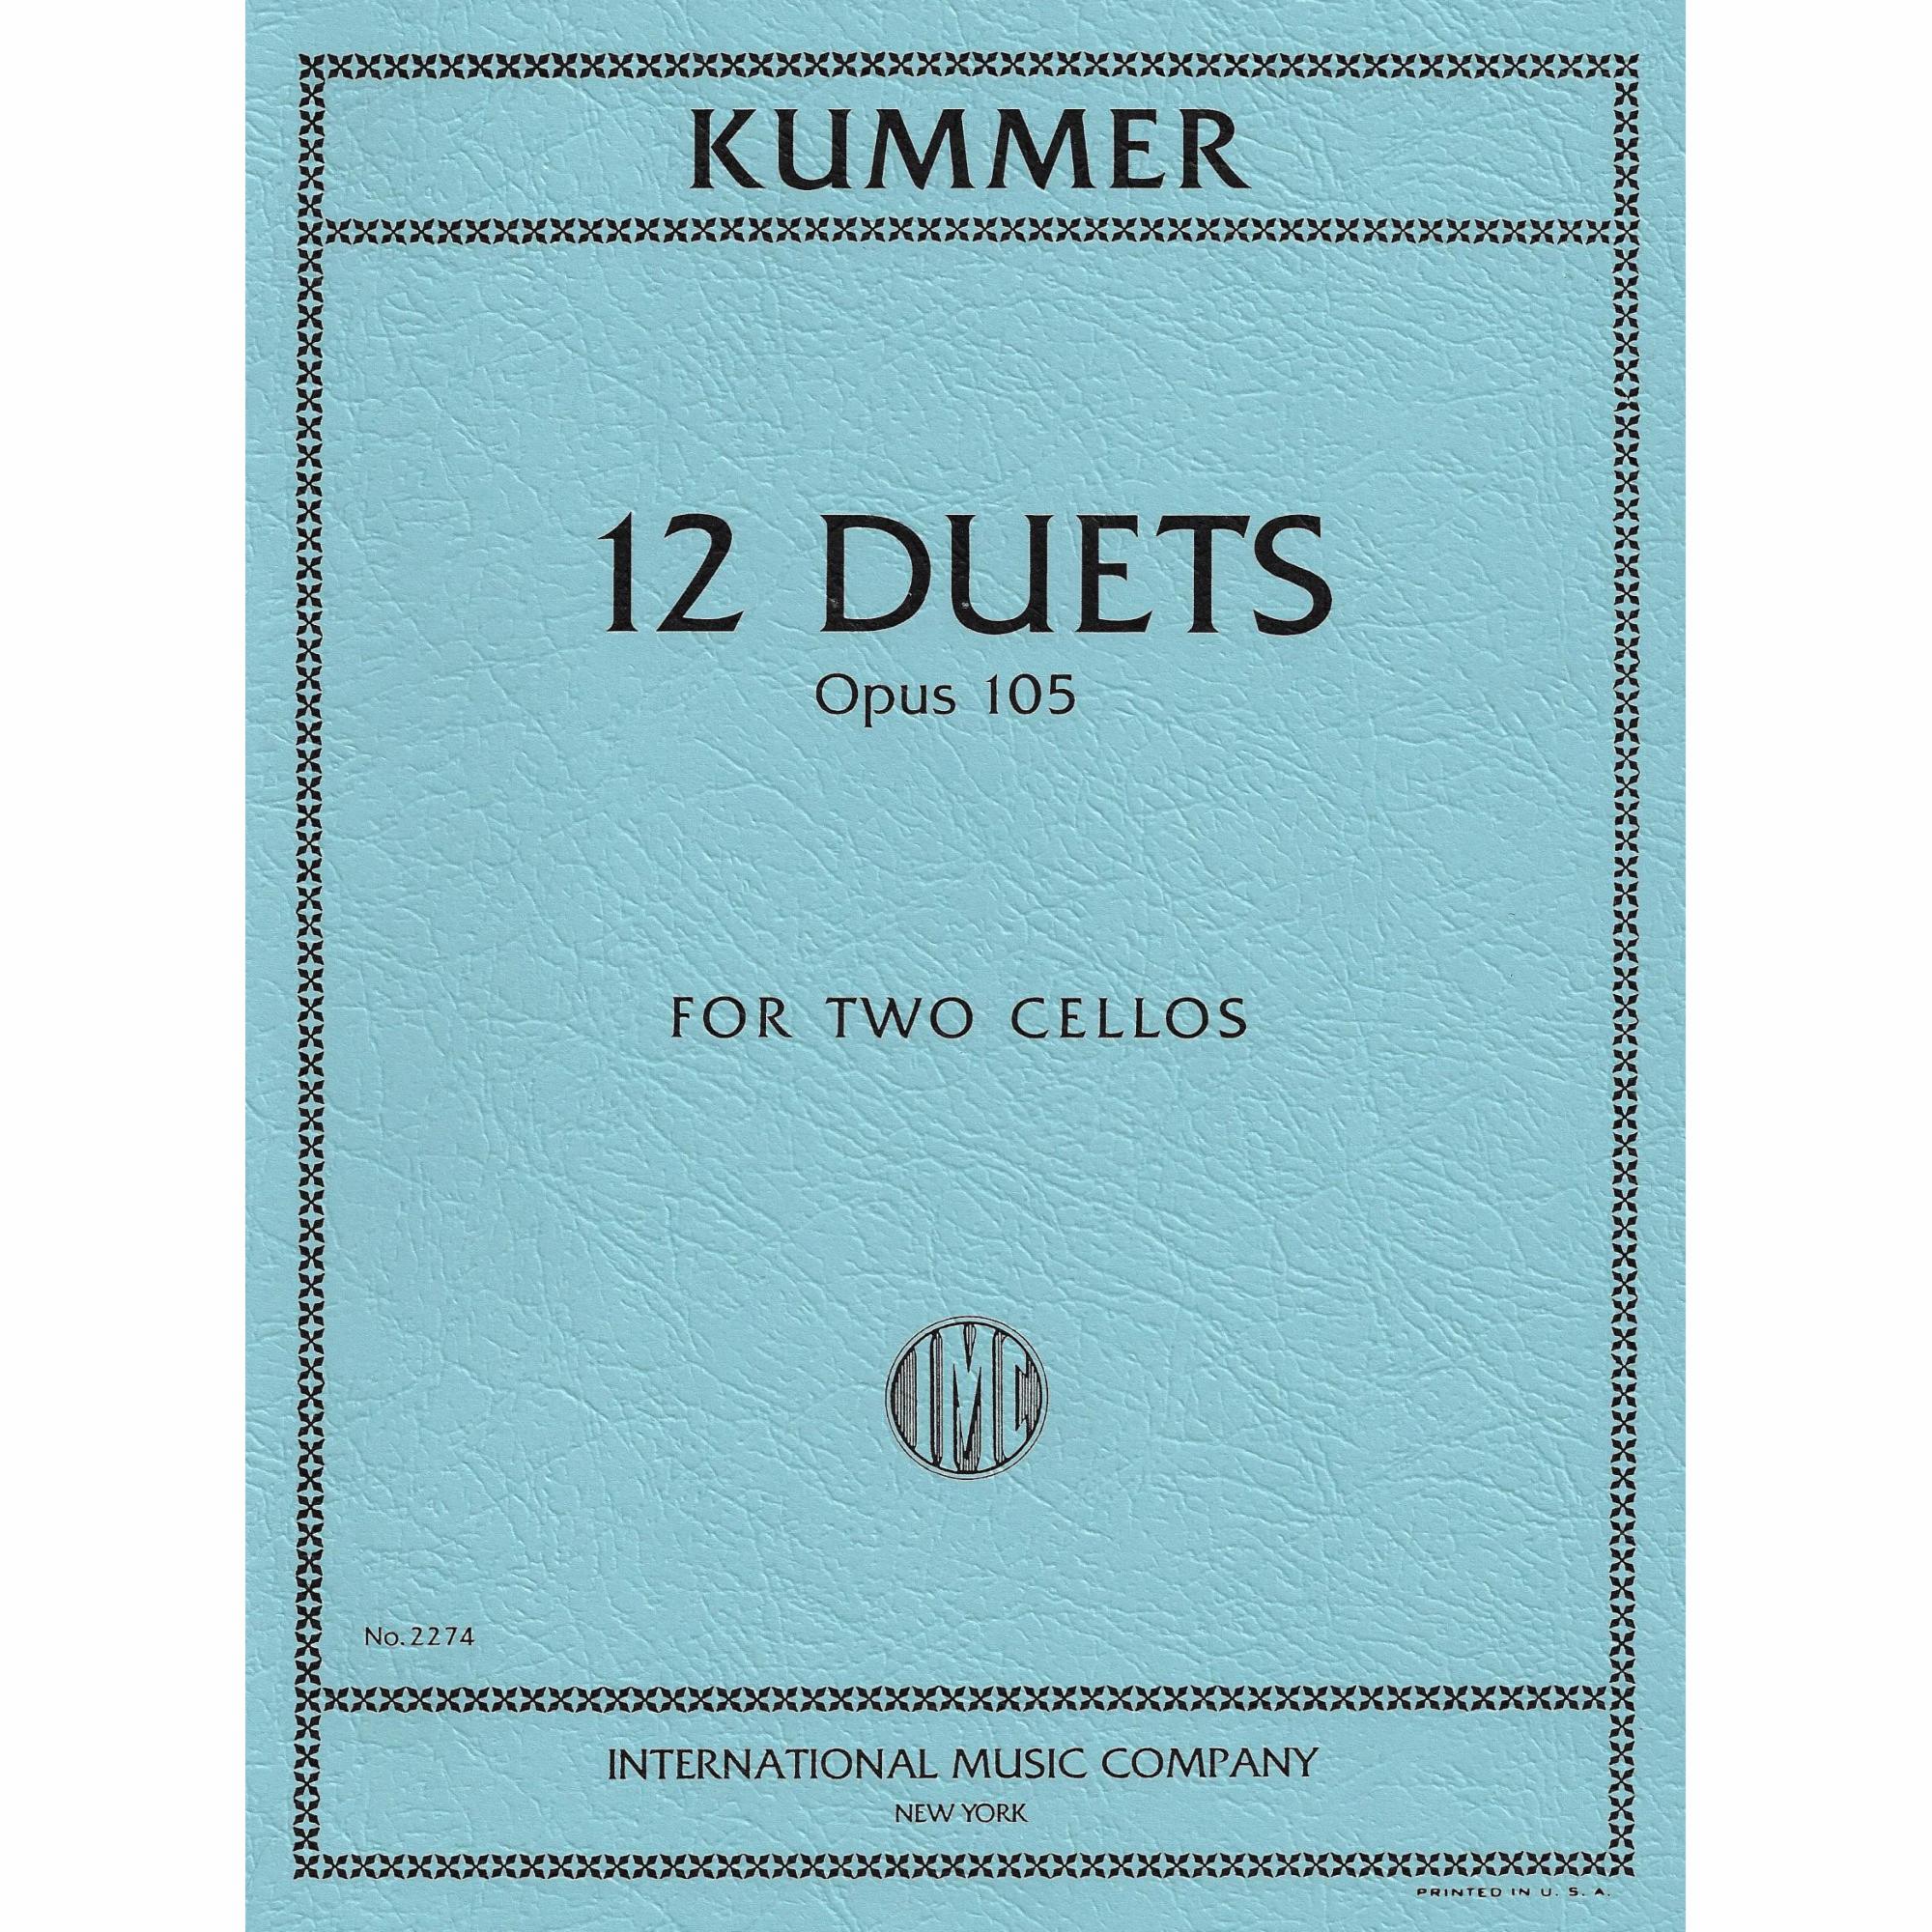 Kummer -- 12 Duets, Op. 105 for Two Cellos